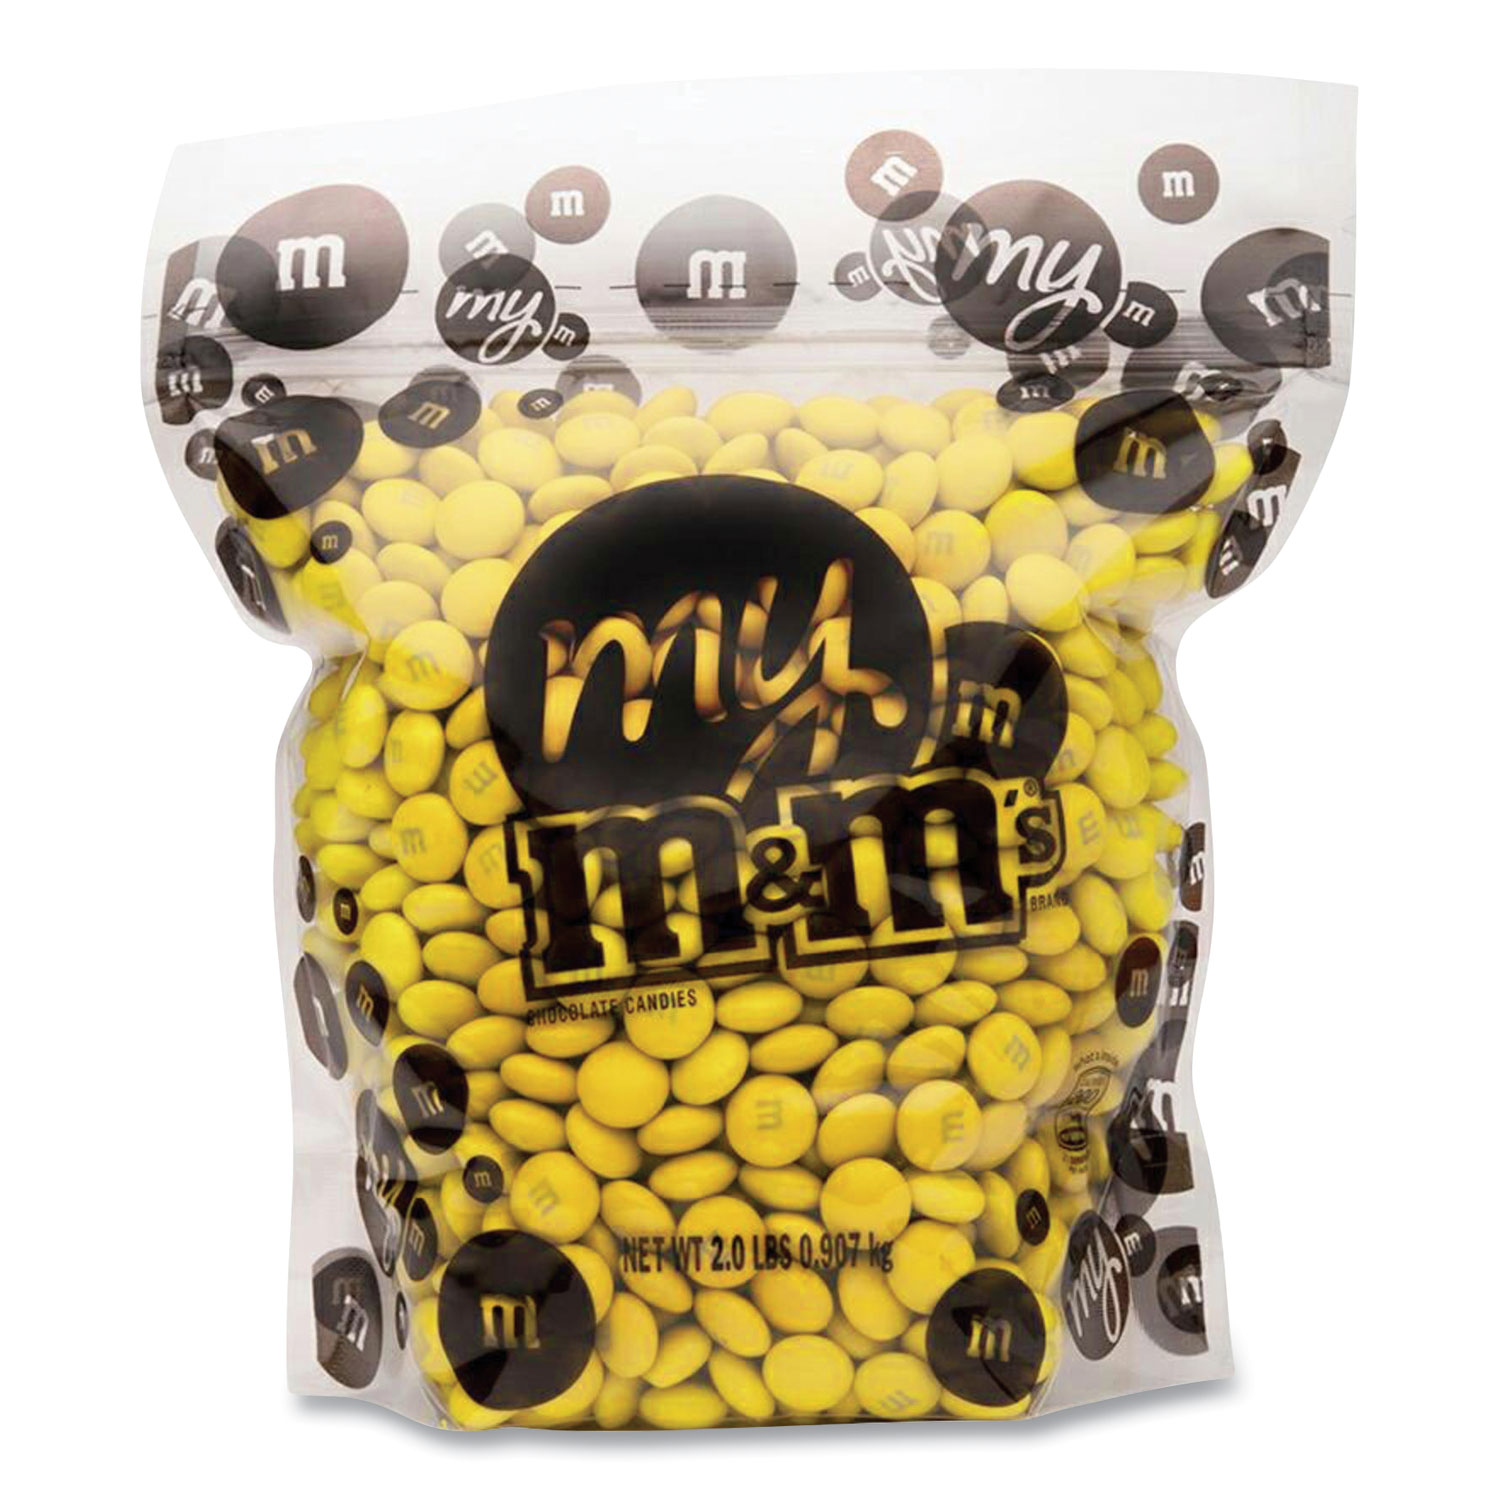  M & M's D01078 My M and M's Bulk Candies, 2 lb Bag, Yellow, Free Delivery in 1-4 Business Days (GRR22500020) 